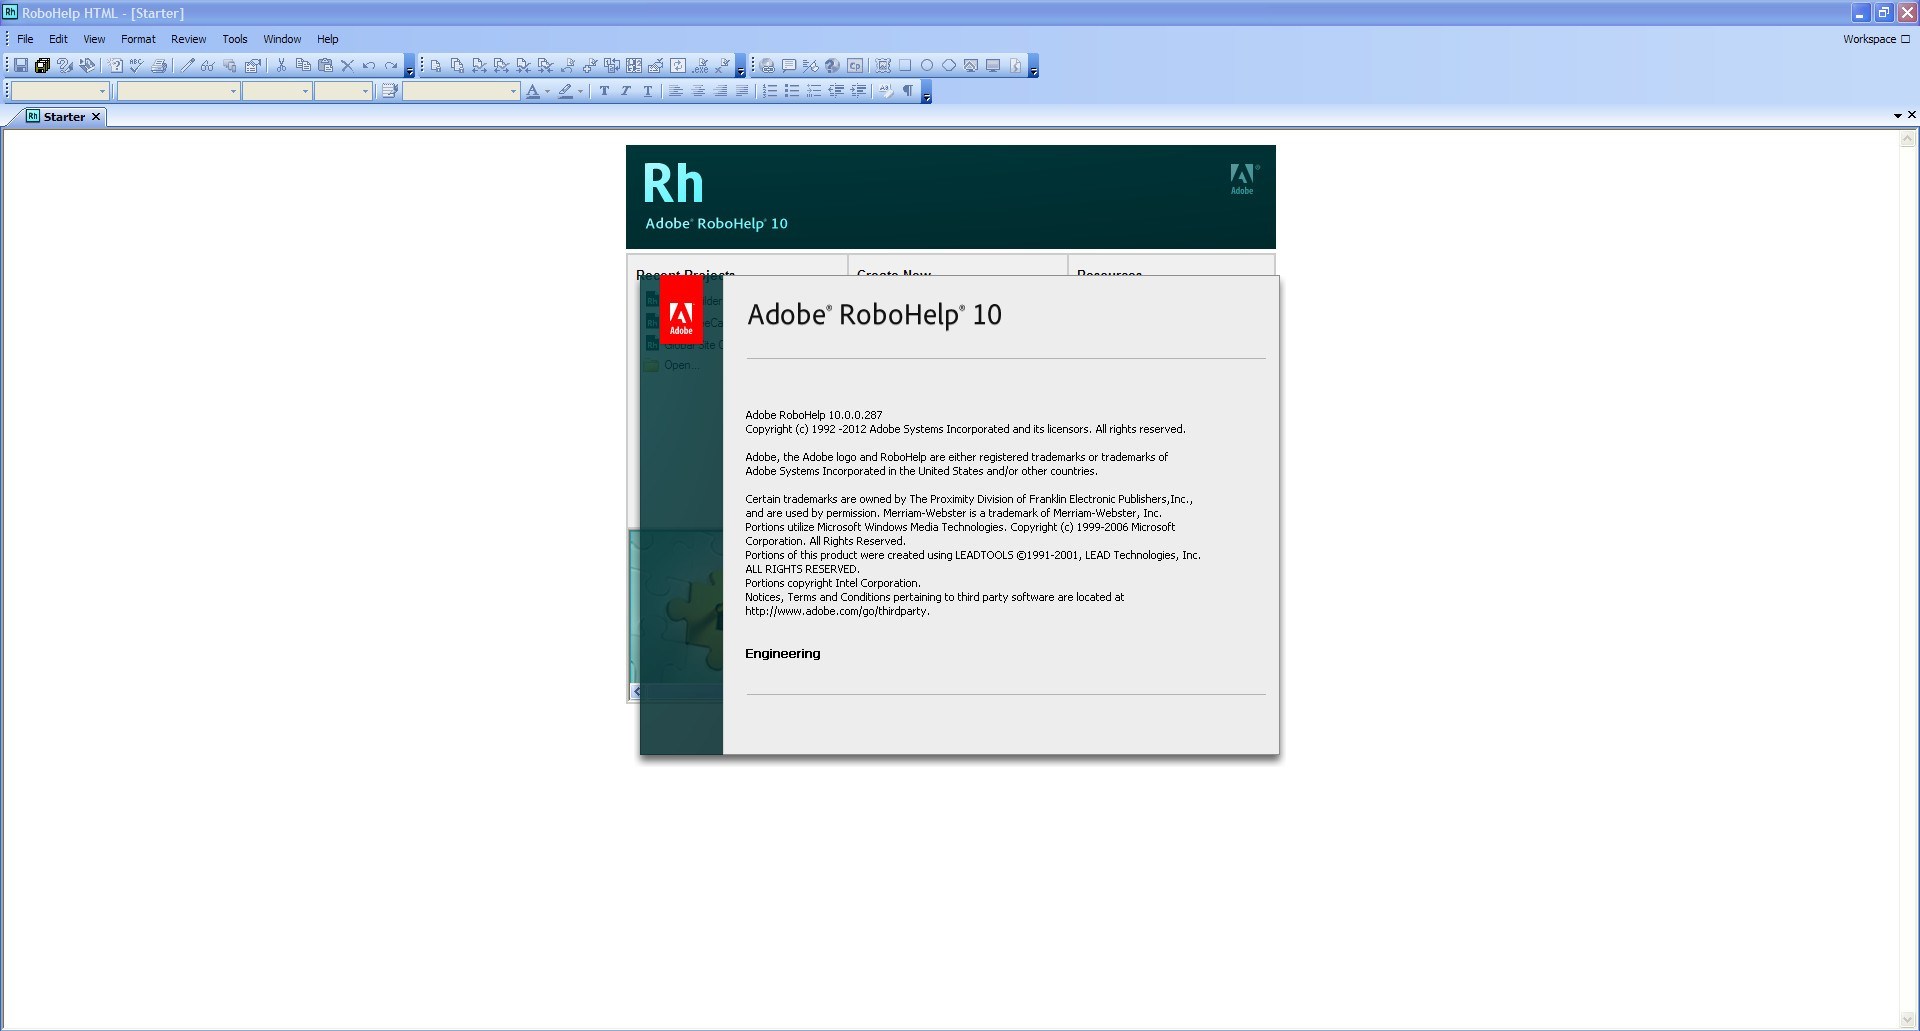 download the last version for iphoneAdobe RoboHelp 2022.3.93